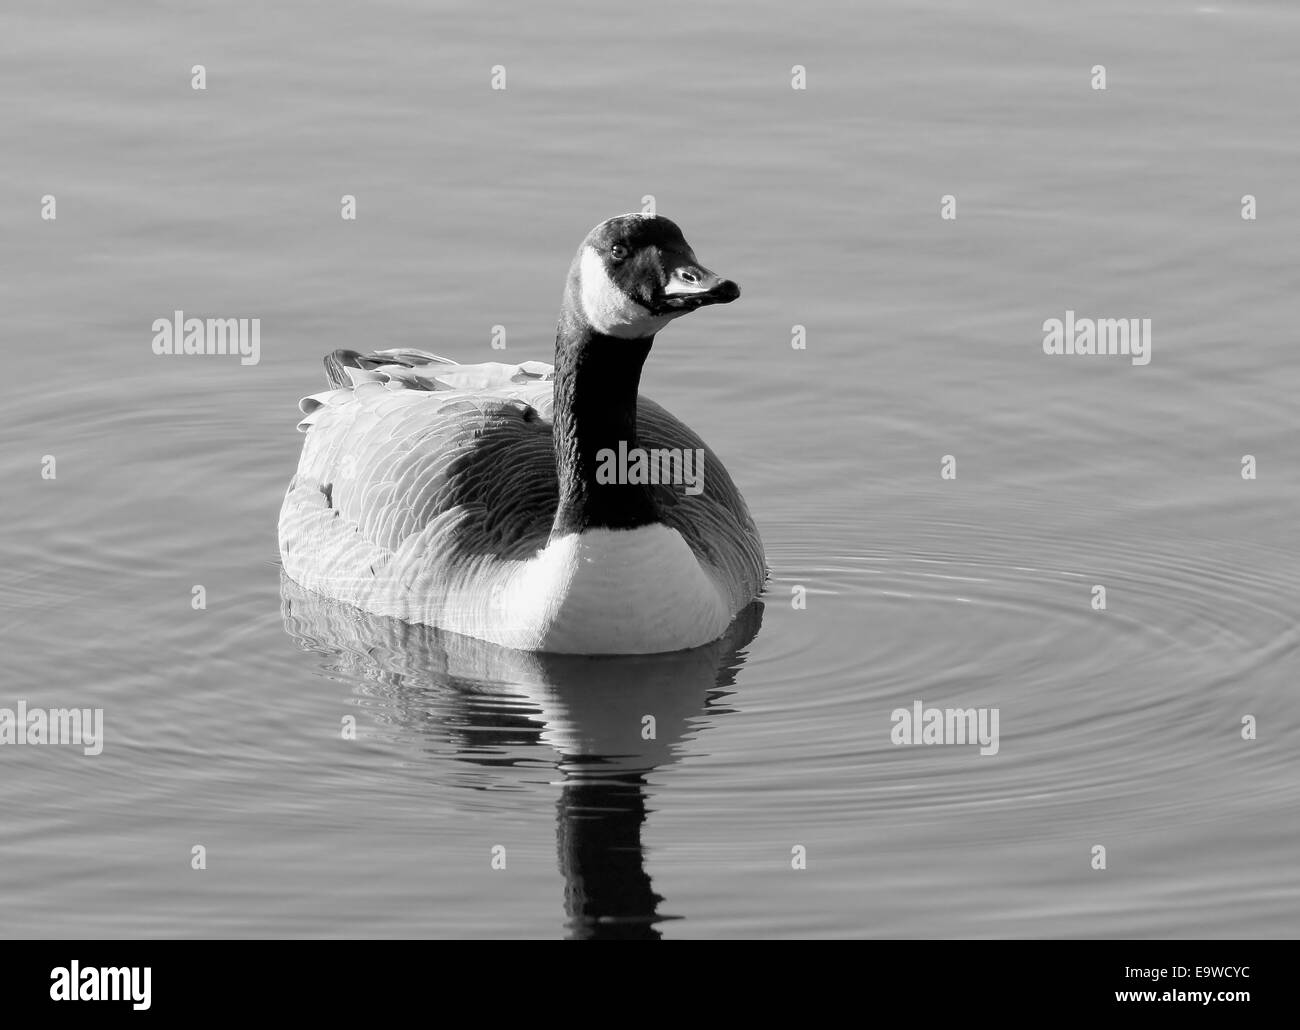 Canadian Goose in Black and White Stock Photo